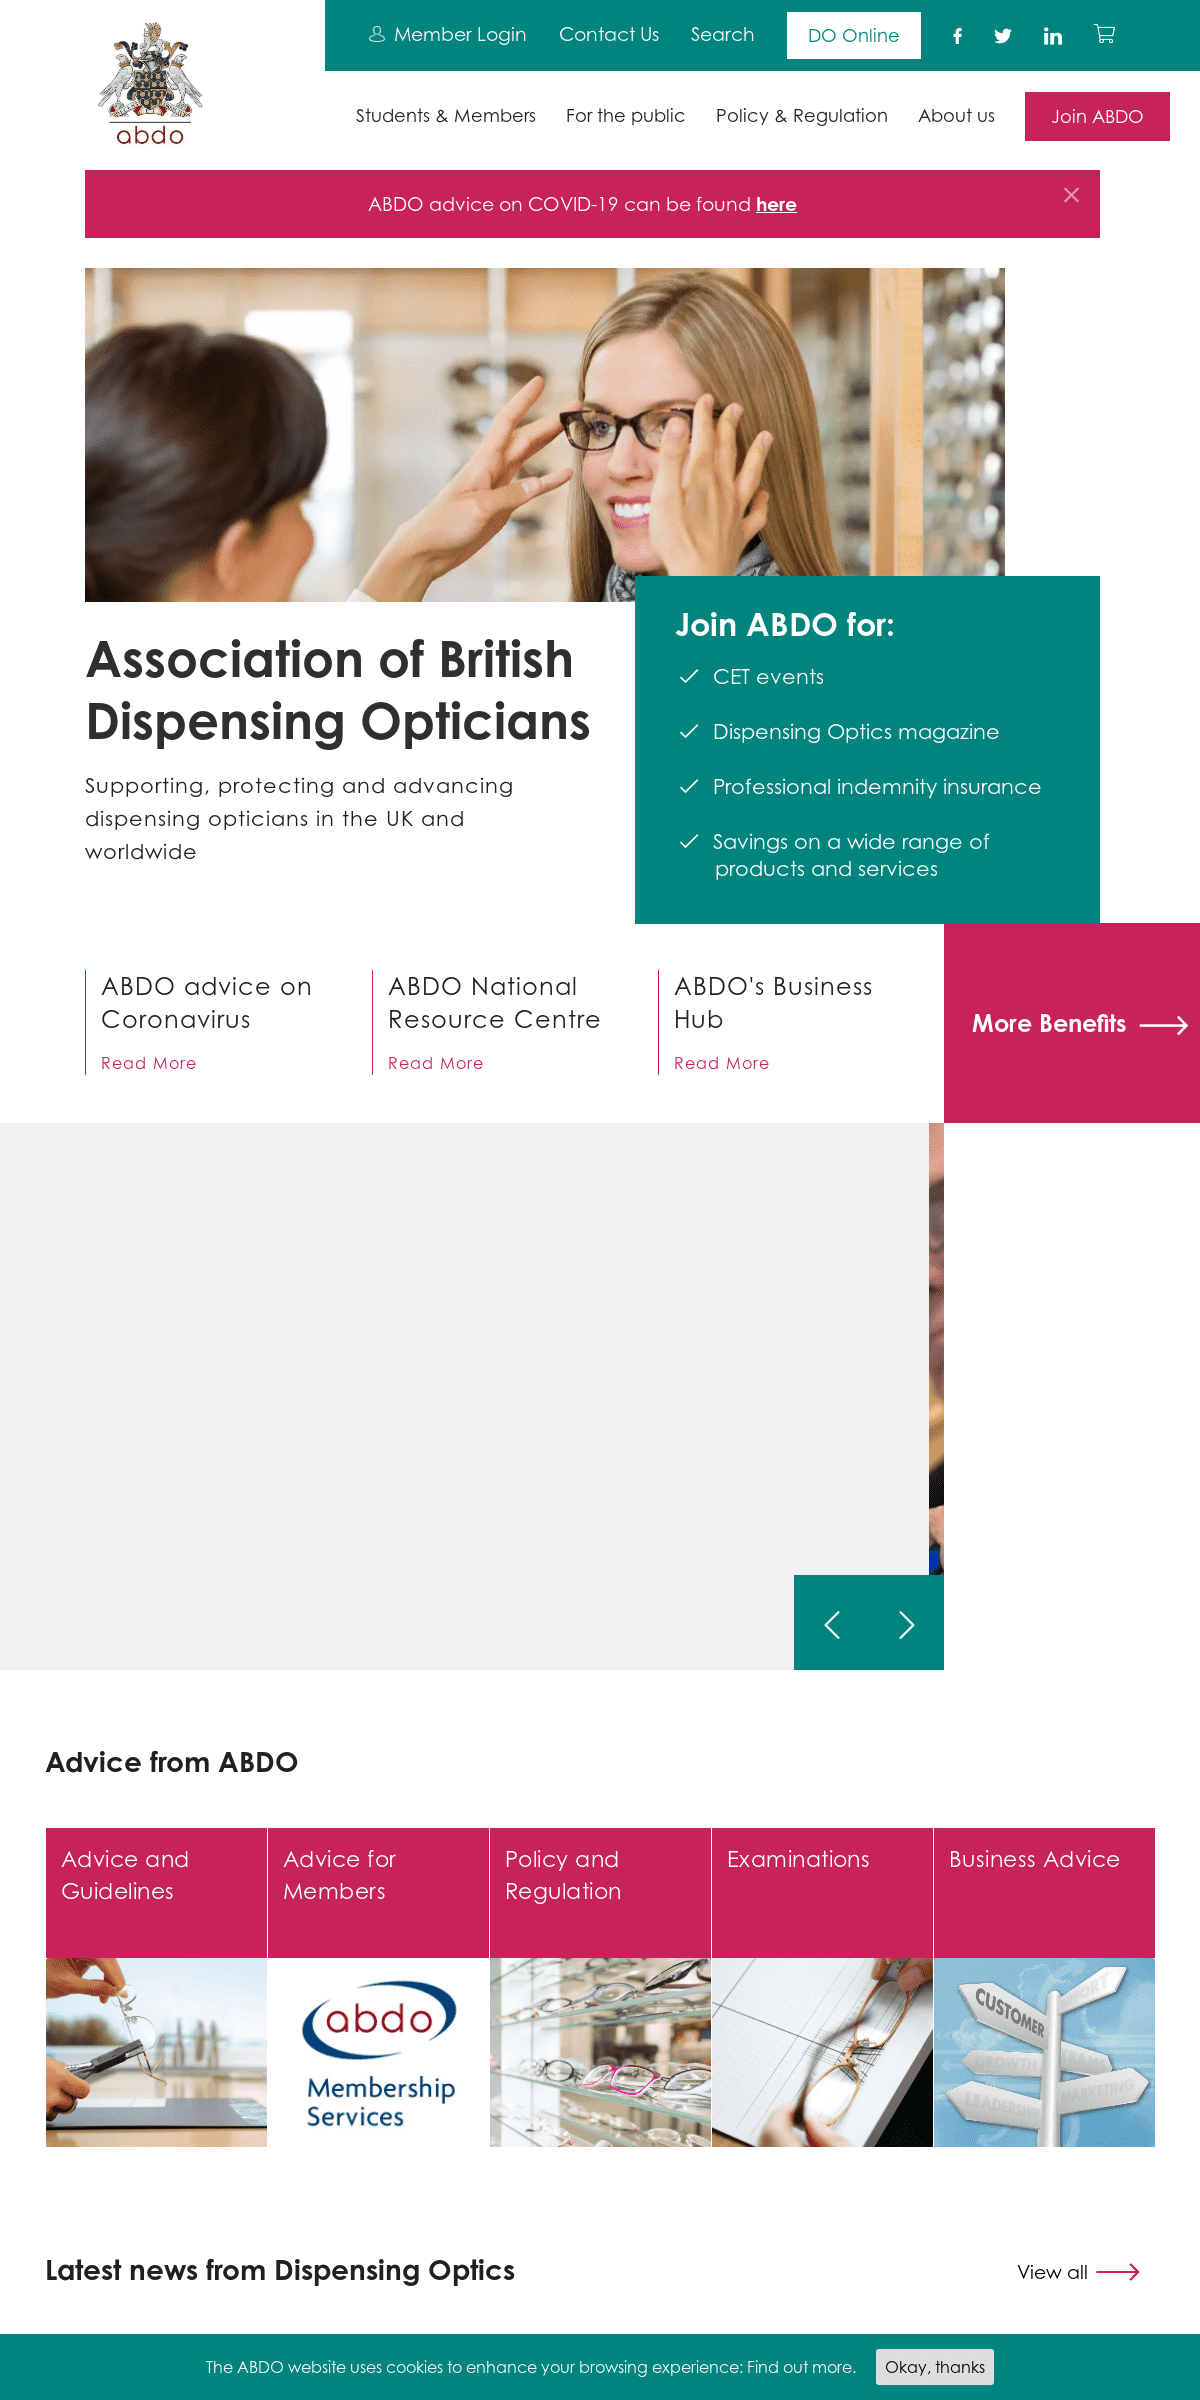 A complete backup of abdo.org.uk